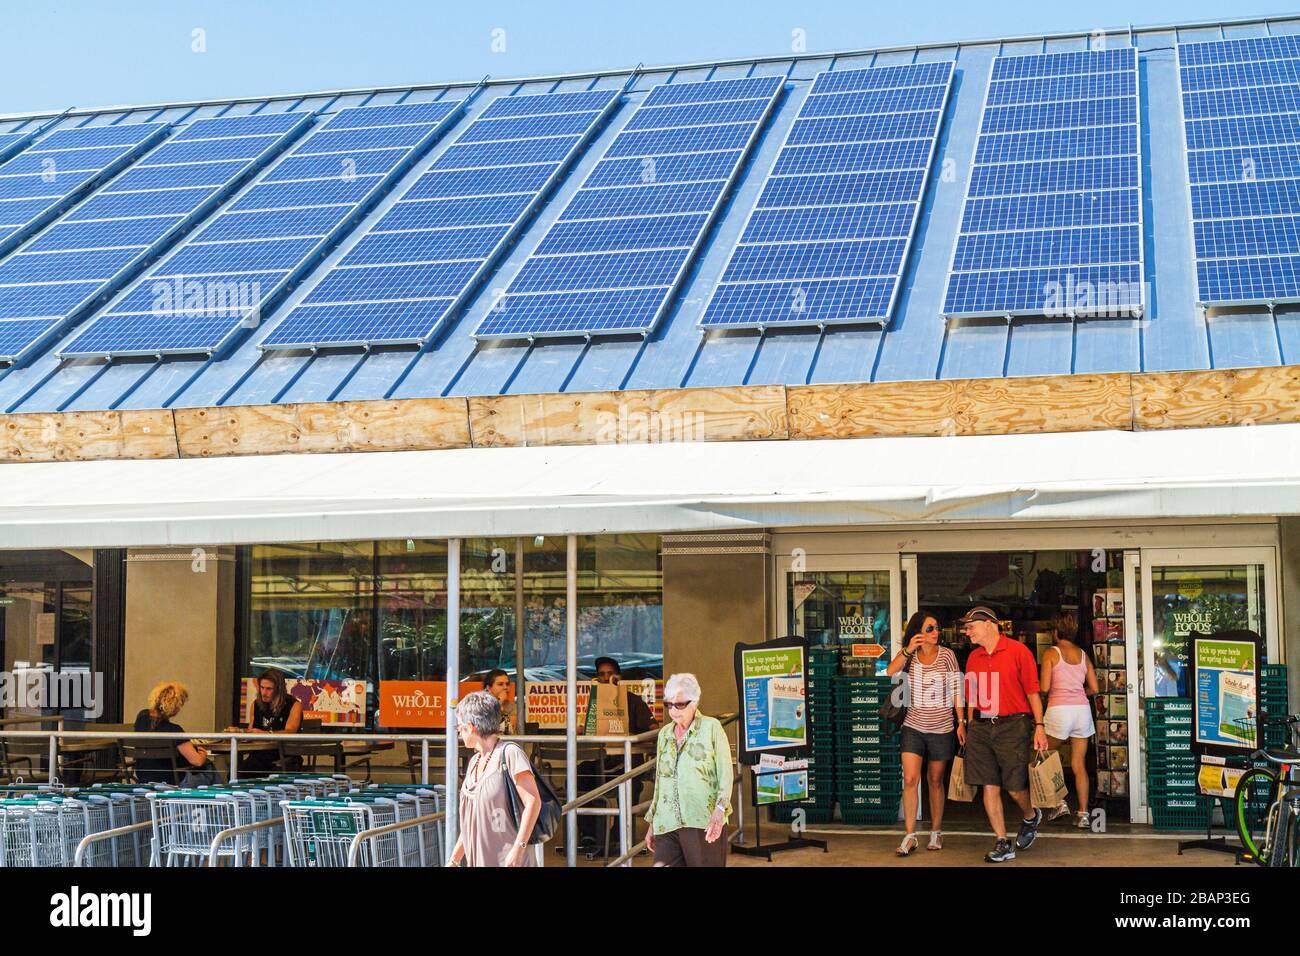 Miami Beach Florida,Whole Foods,grocery store,supermarket,entrance,front,roof,solar panels,FL110331128 Stock Photo